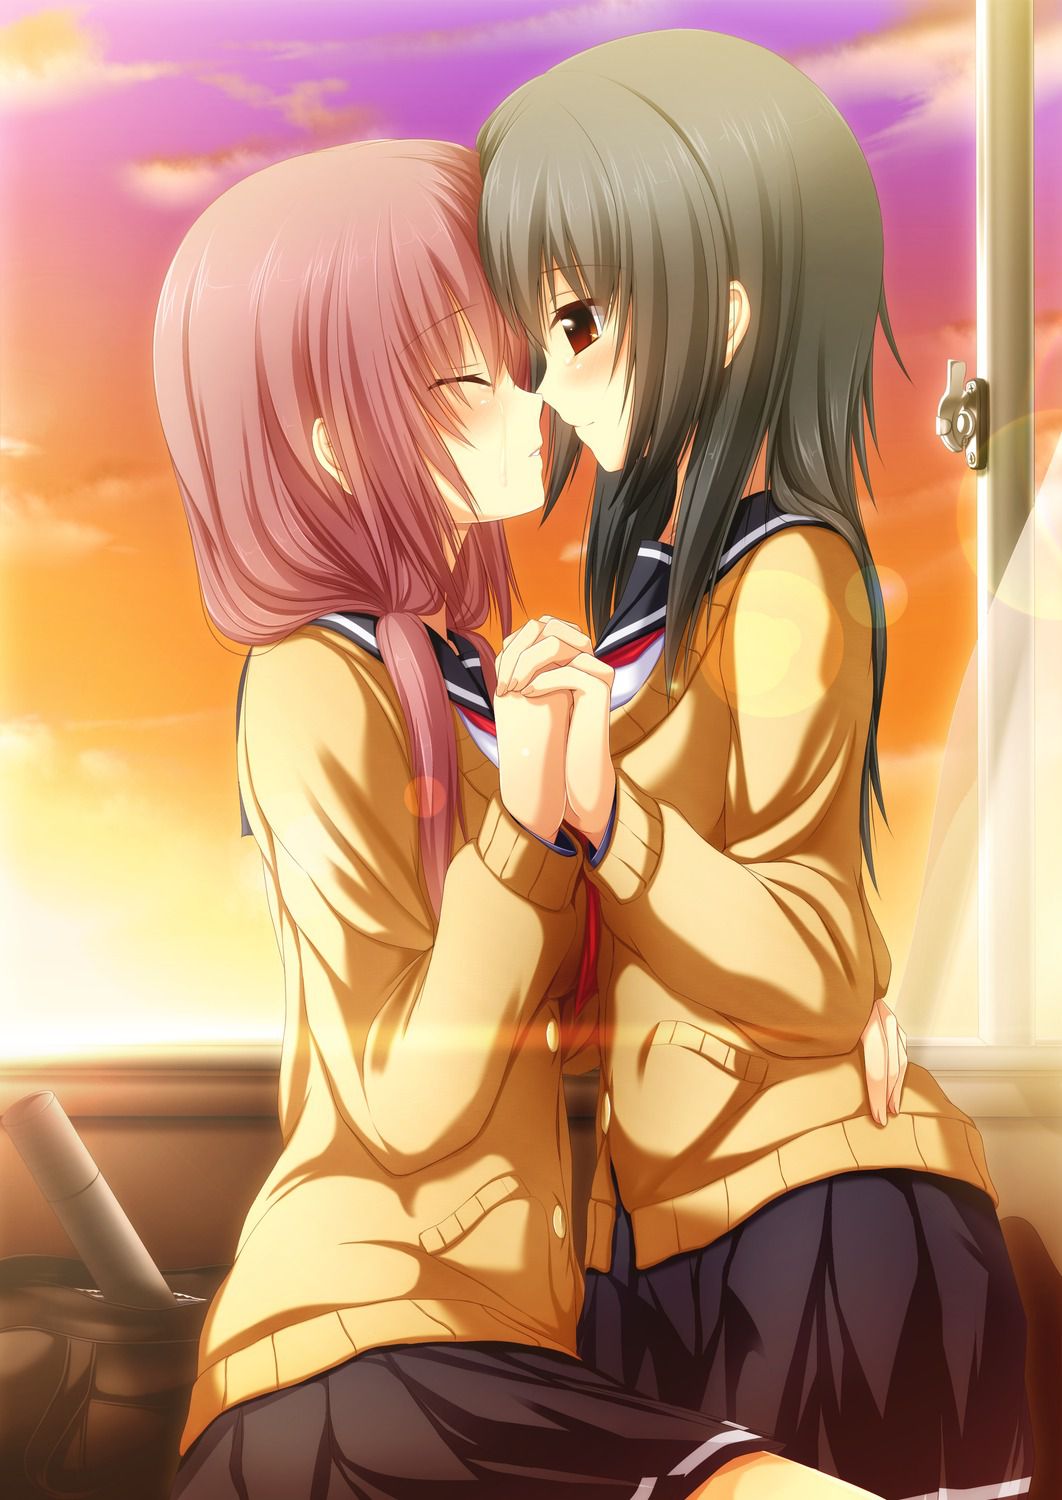 Yuri and Lesbian secondary image wwww to be naughty in girls each other 4 15